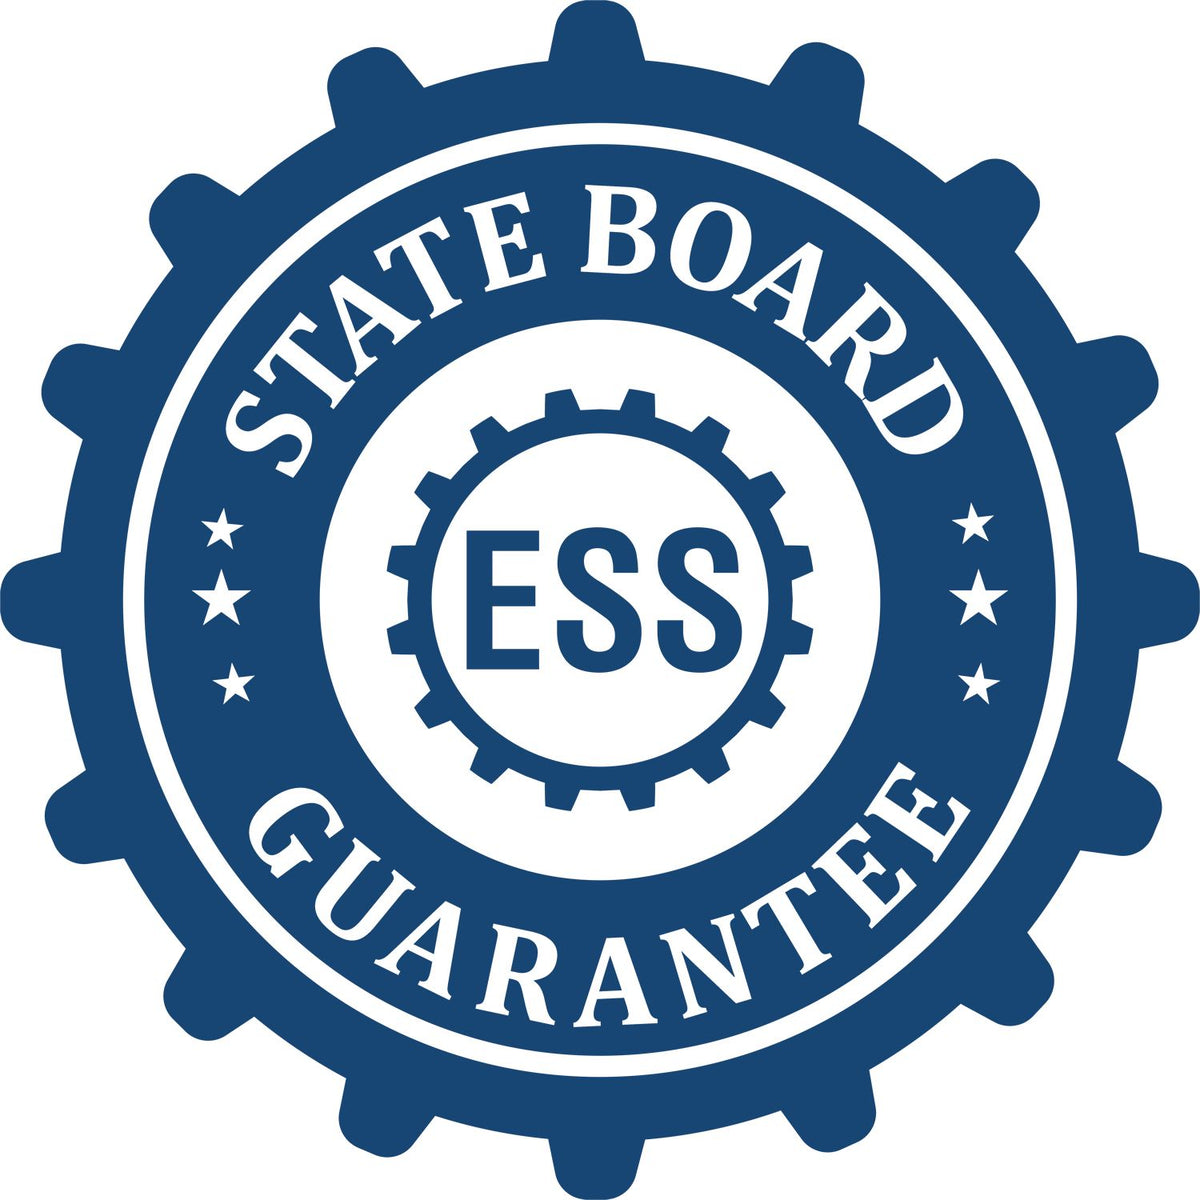 An emblem in a gear shape illustrating a state board guarantee for the Hybrid Pennsylvania Engineer Seal